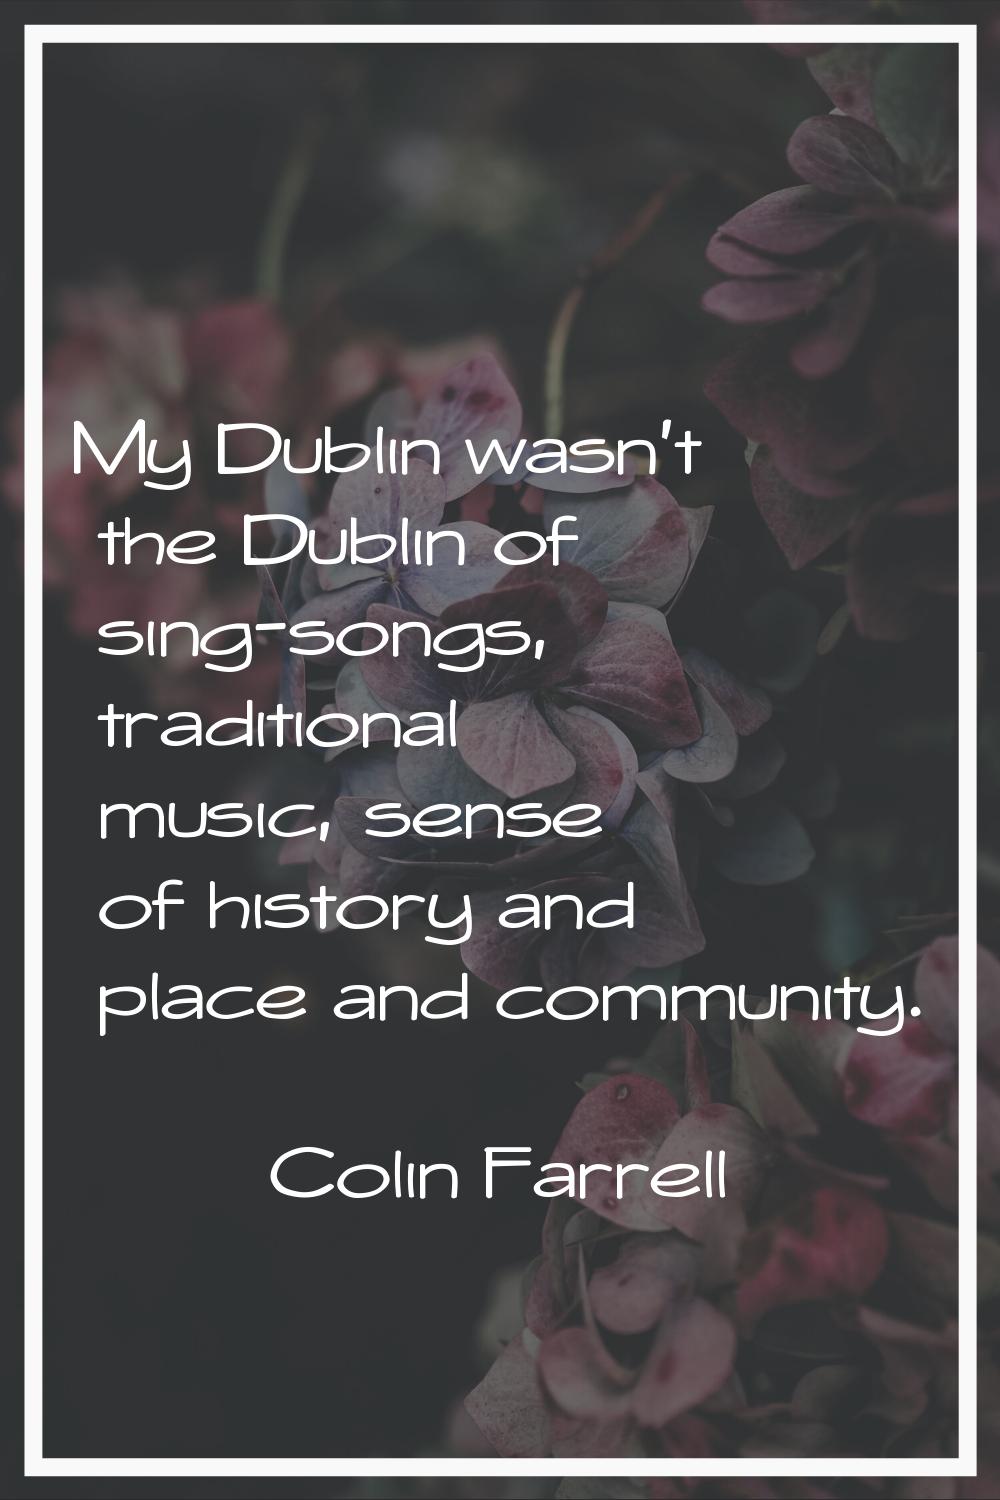 My Dublin wasn't the Dublin of sing-songs, traditional music, sense of history and place and commun